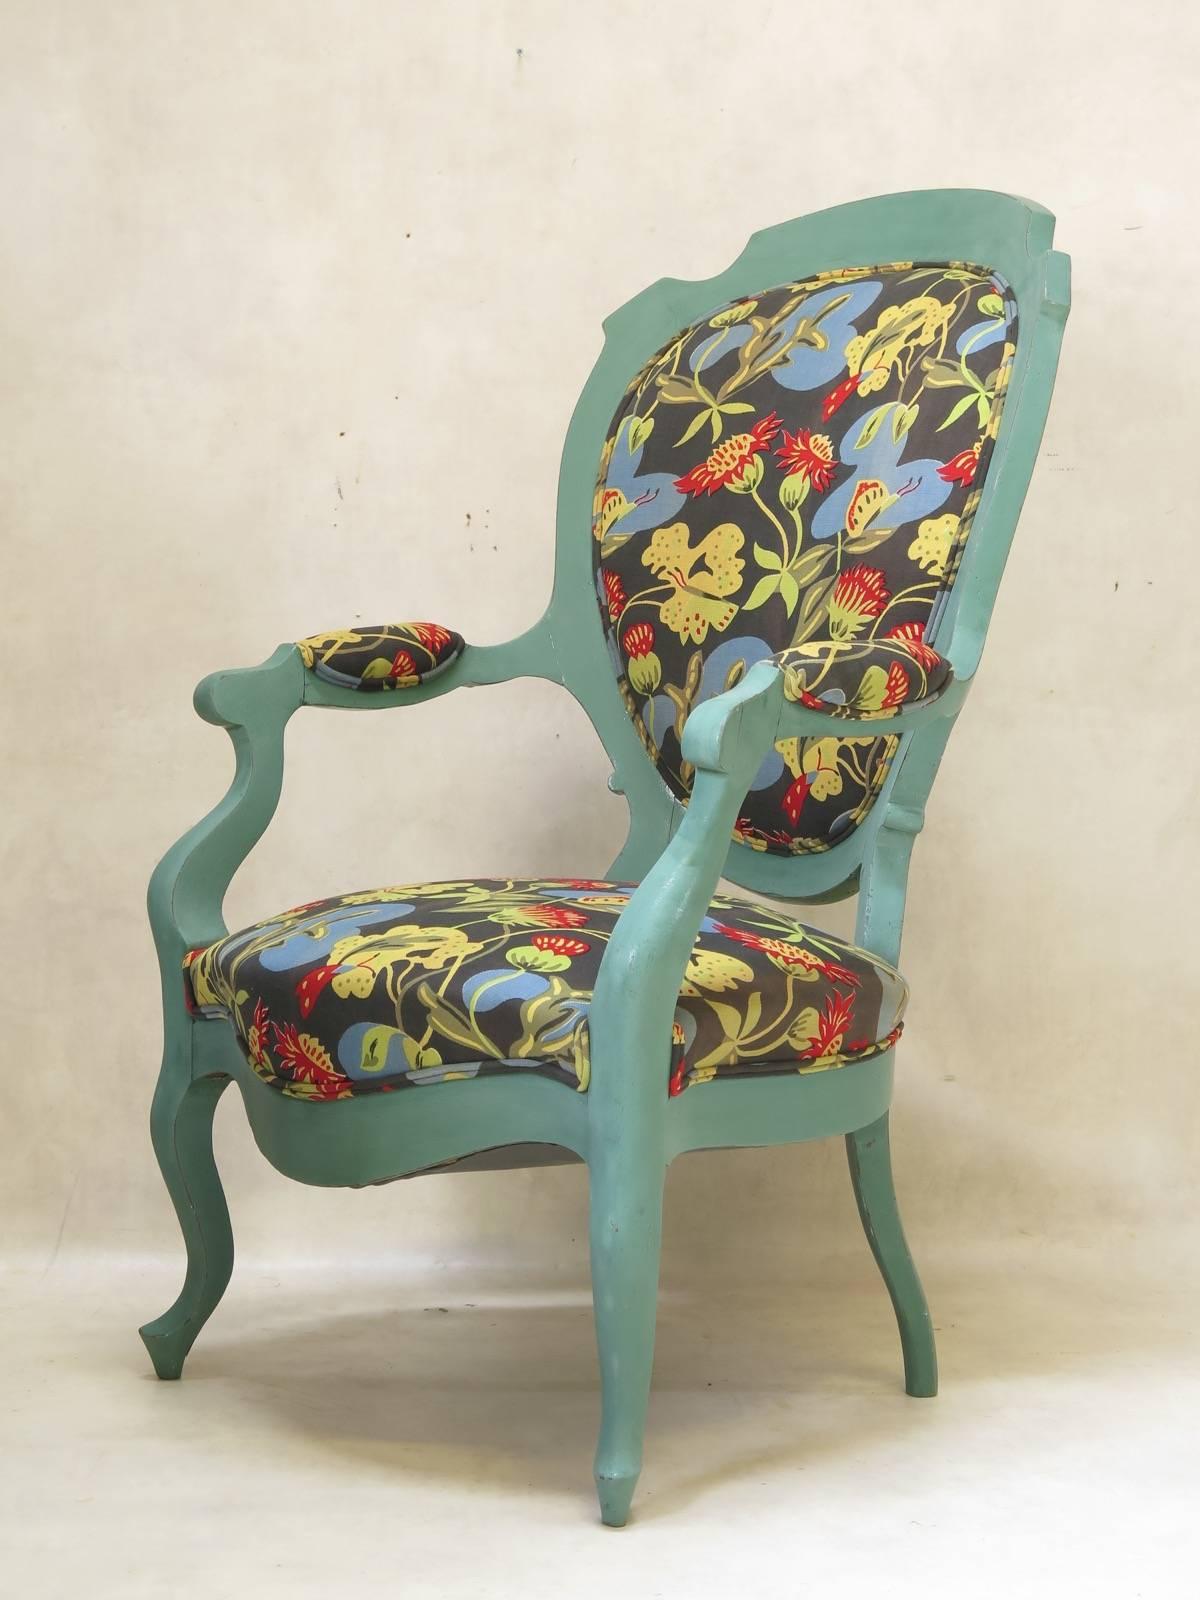 Unusual Louis XV Voltaire armchair, with a large medallion back, and cabriole legs; painted bluey-green, and upholstered with a colourful, vintage 1930s Art Deco fabric.